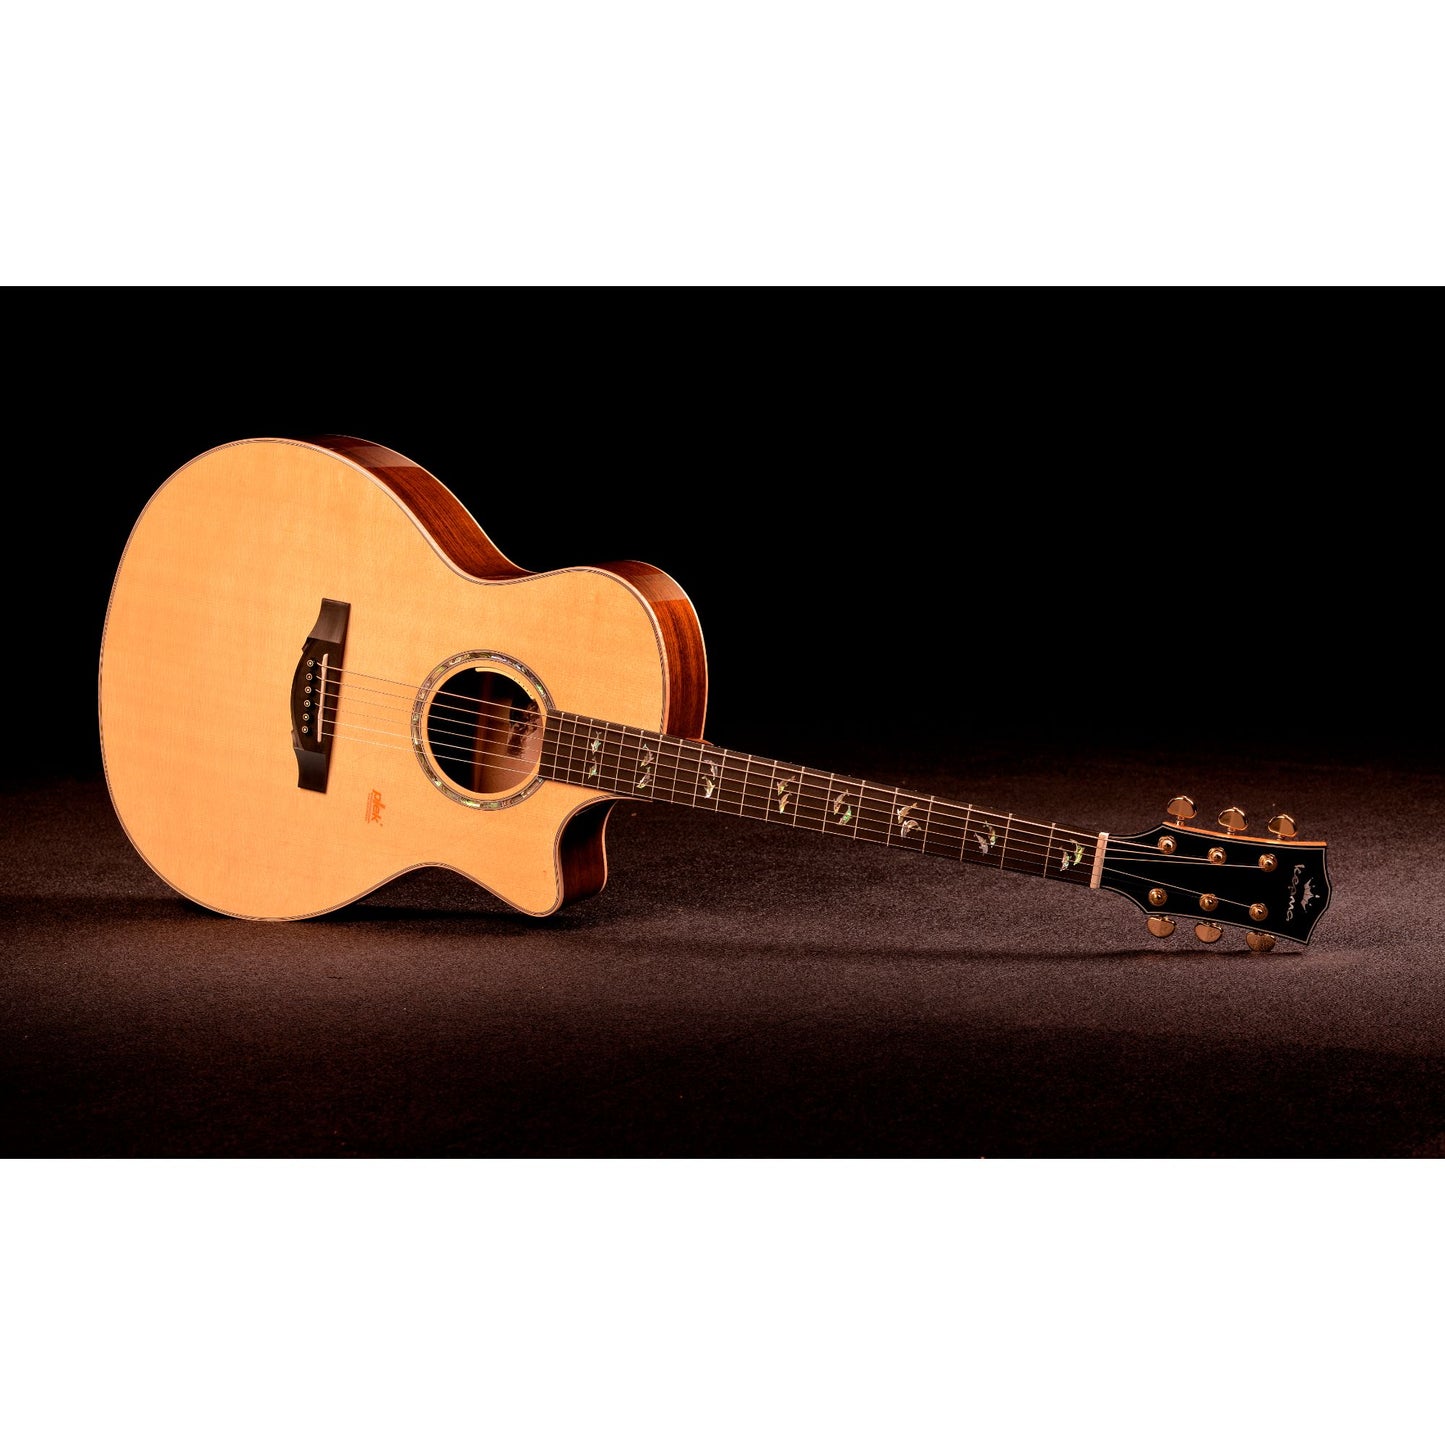 Kepma A1E GA All Solid Grand auditorium cutaway shape guitar with Lr baggs stage pro anthem pick up